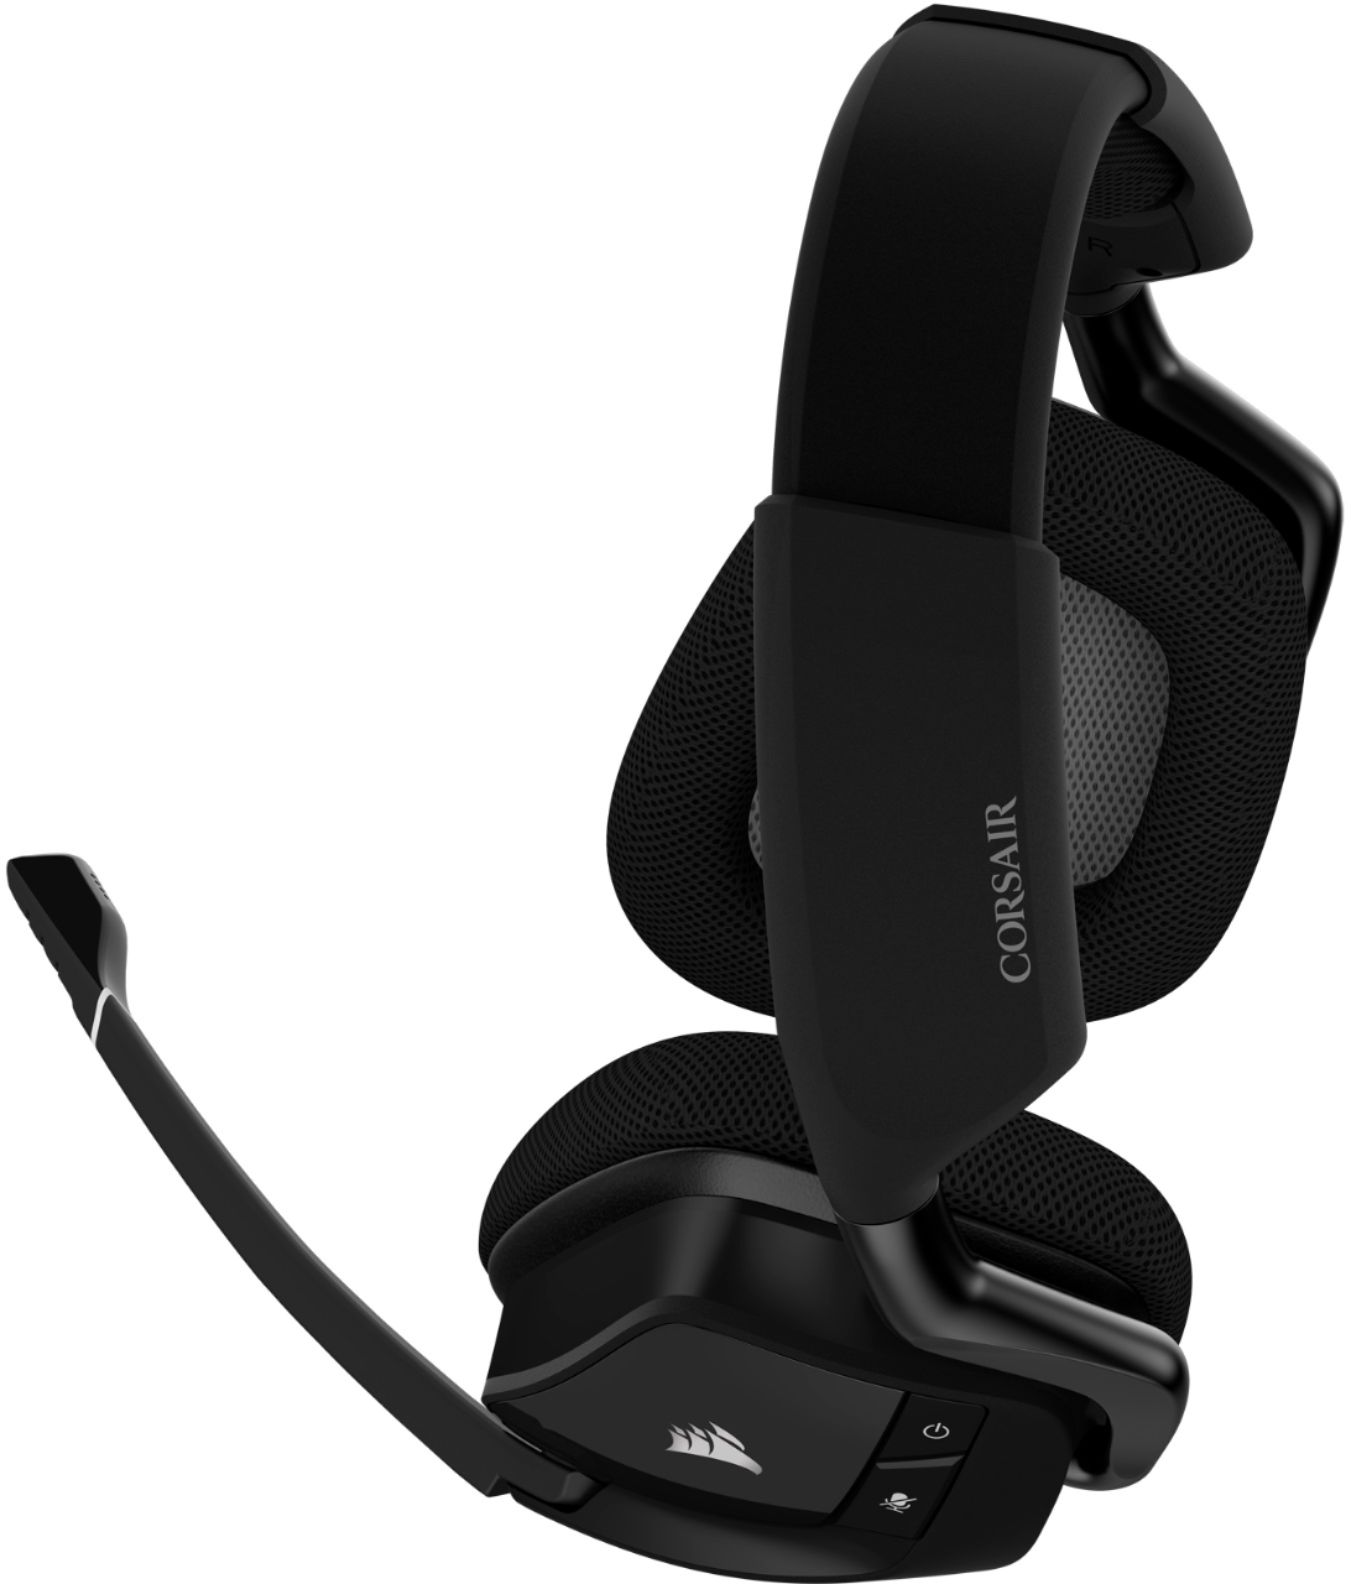 CORSAIR VOID RGB 7.1 Surround Sound Gaming Headset PC, PS5, PS4 Carbon CA-9011201-NA - Best Buy